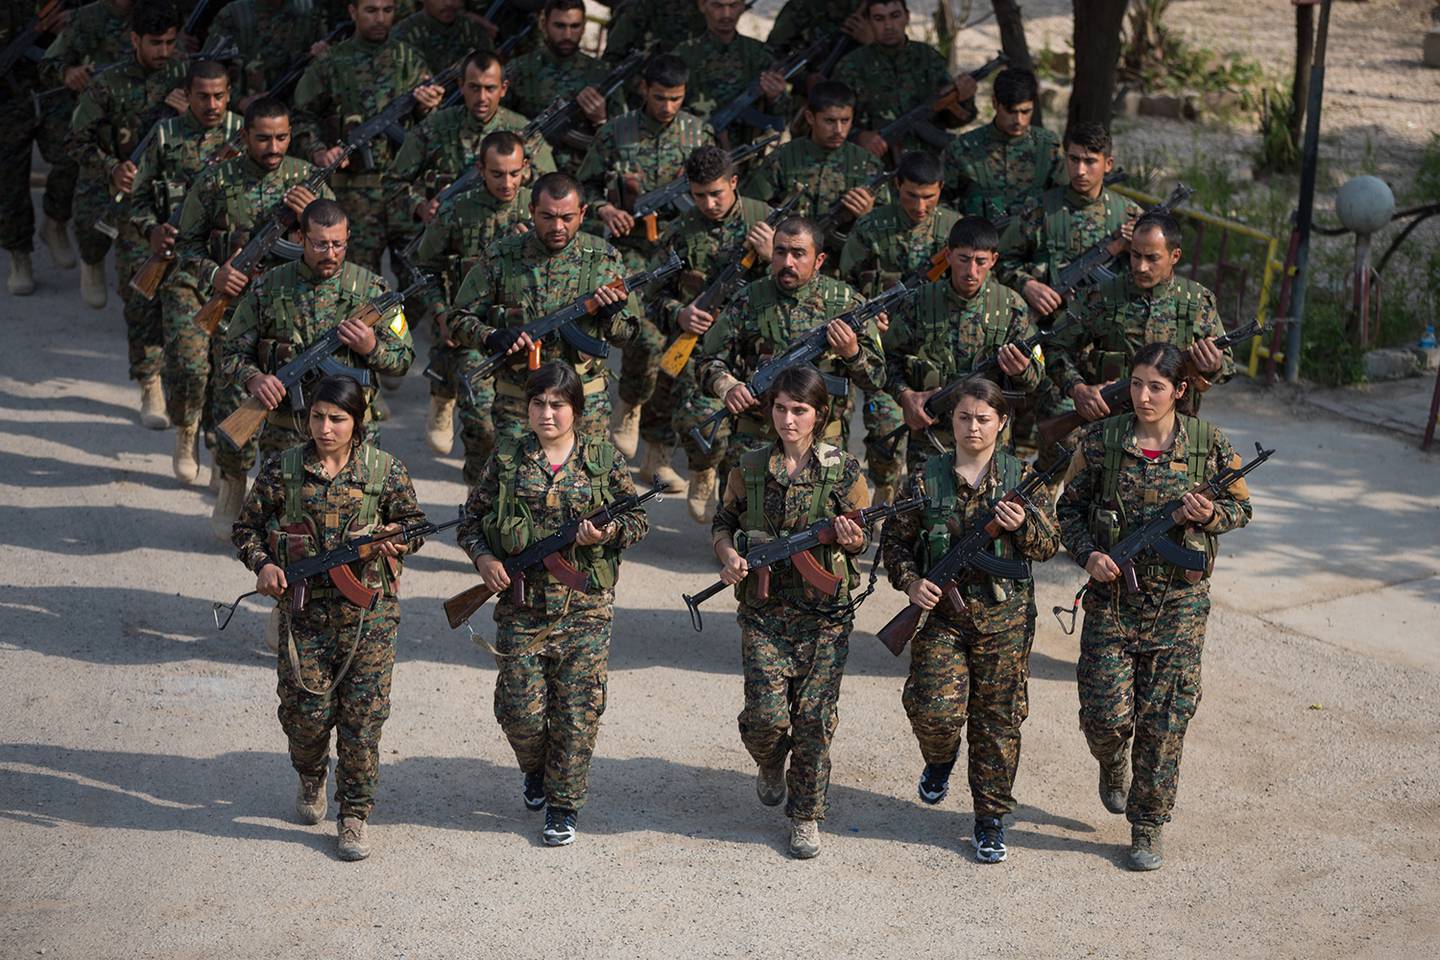 Members of the Syrian Democratic Forces stand in formation